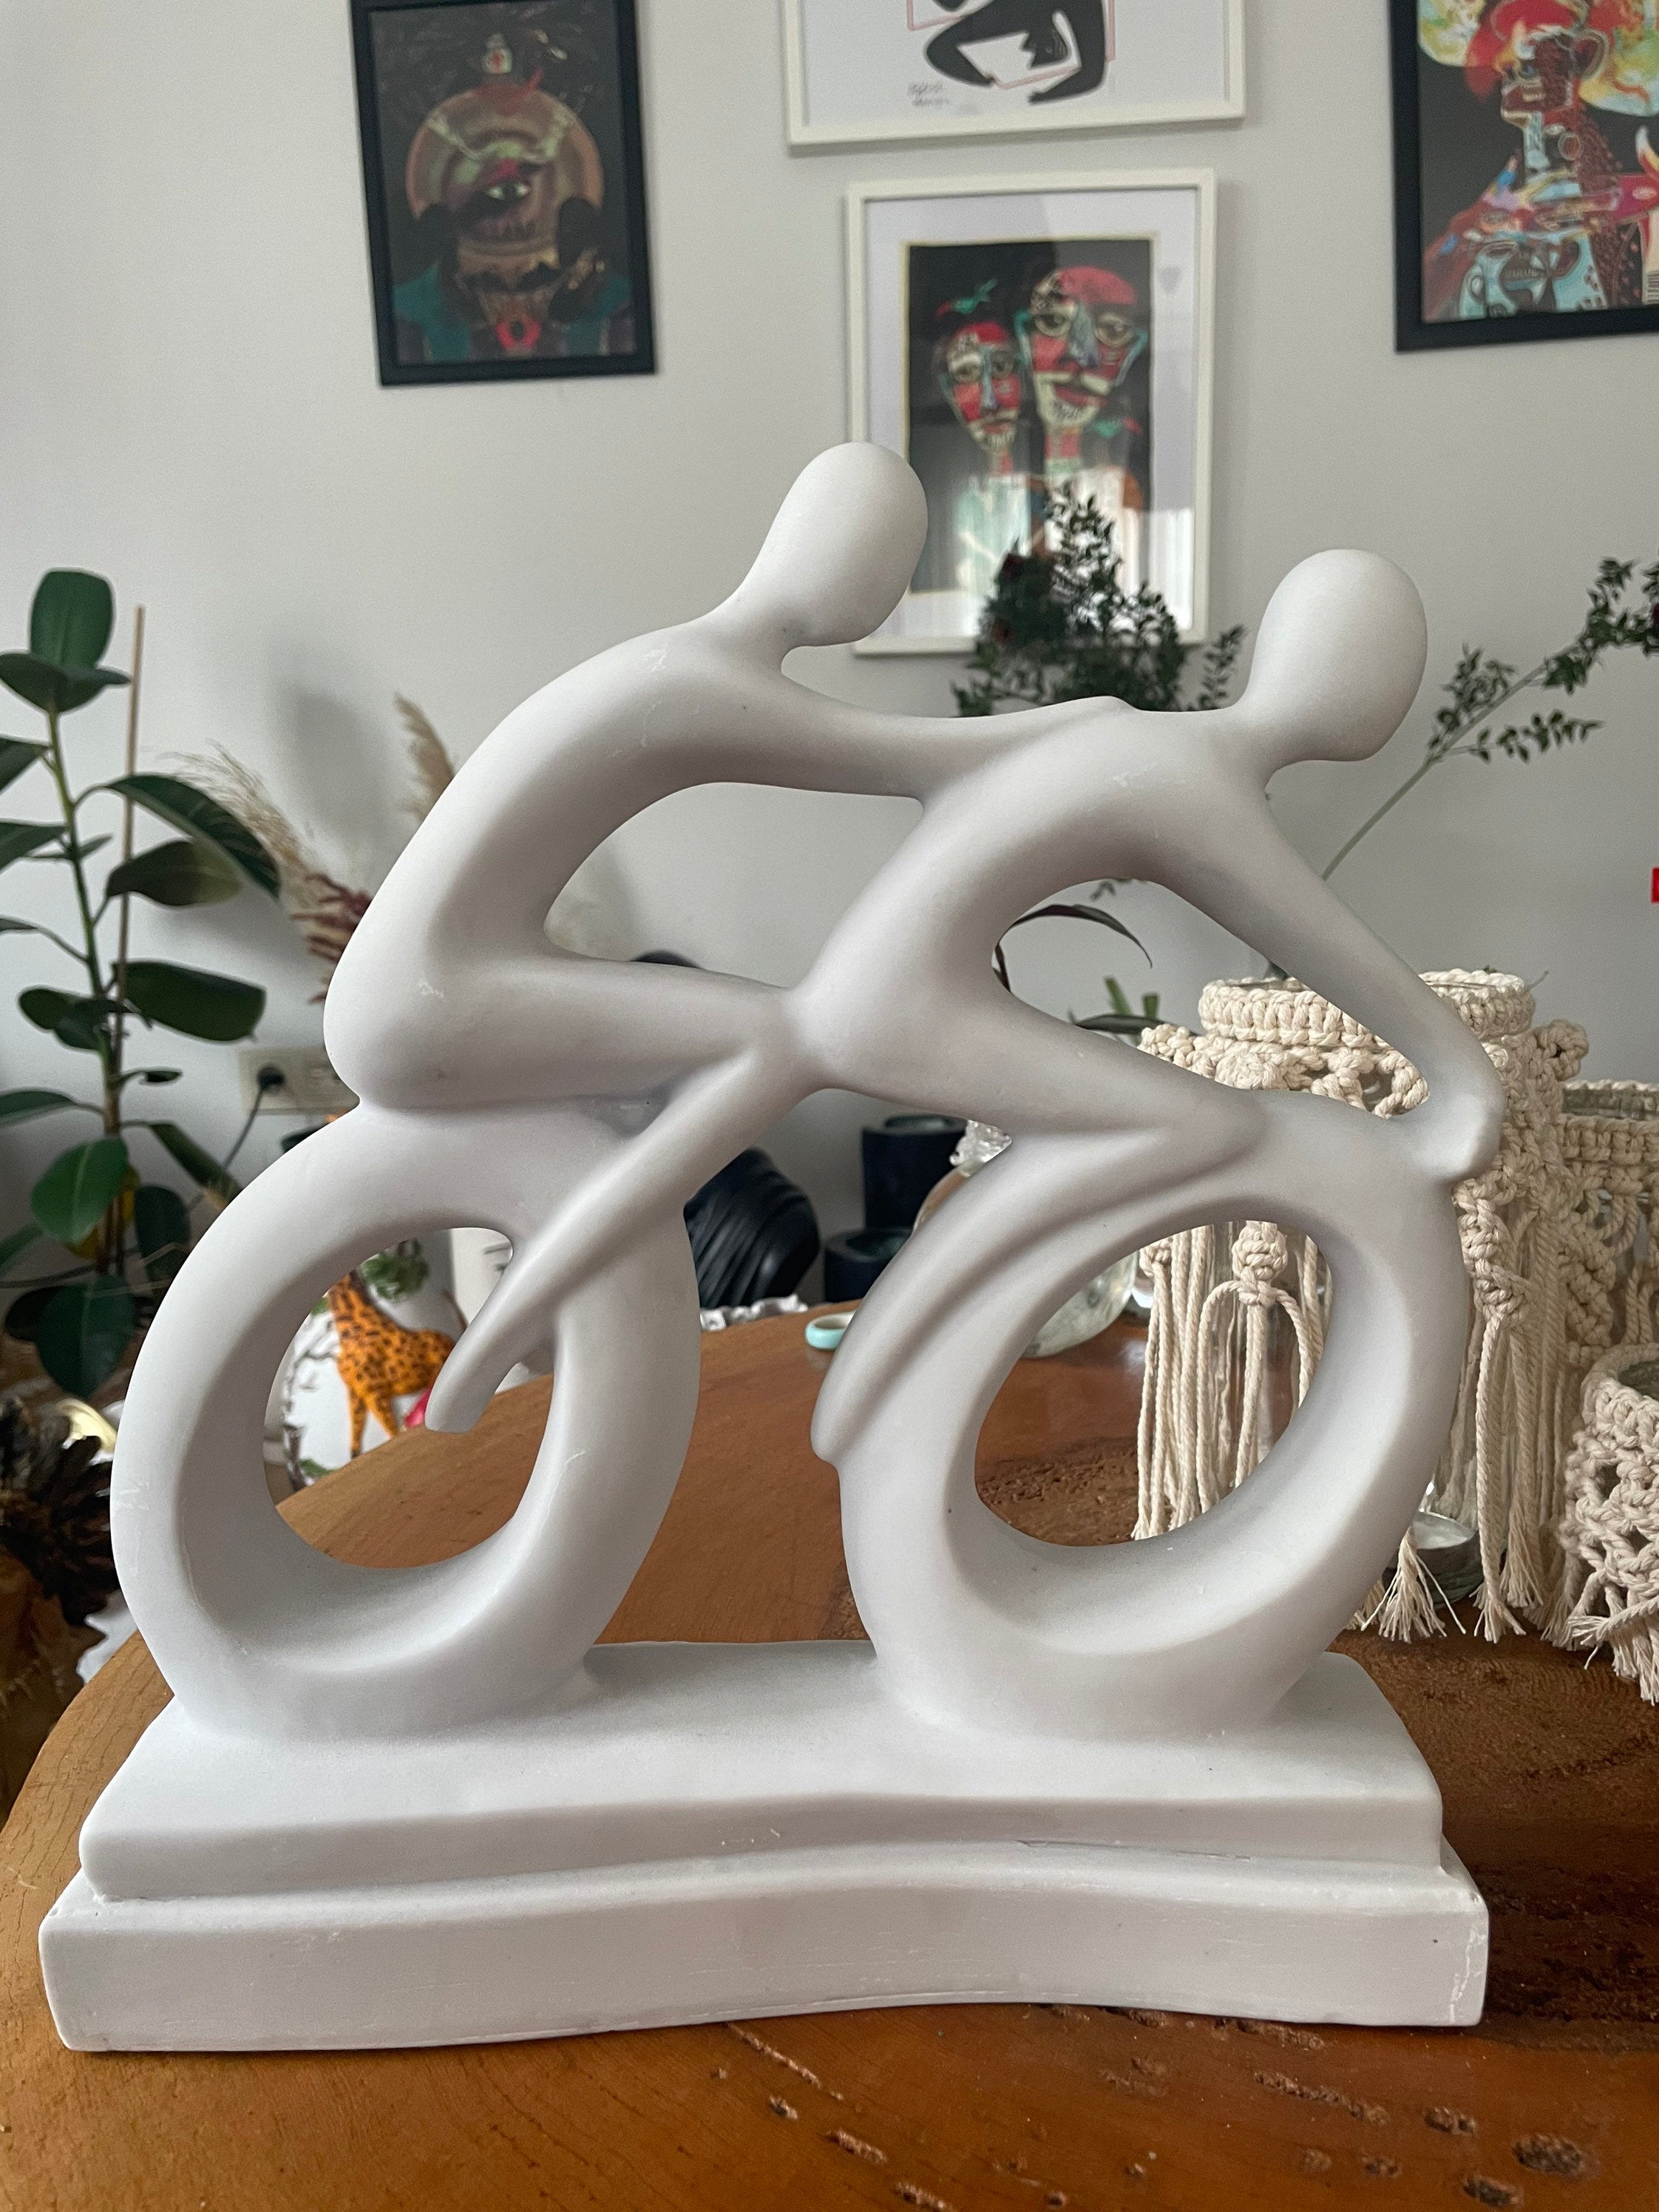 Abstract Cyclists Sculpture Statue: Capturing the Essence of Motion